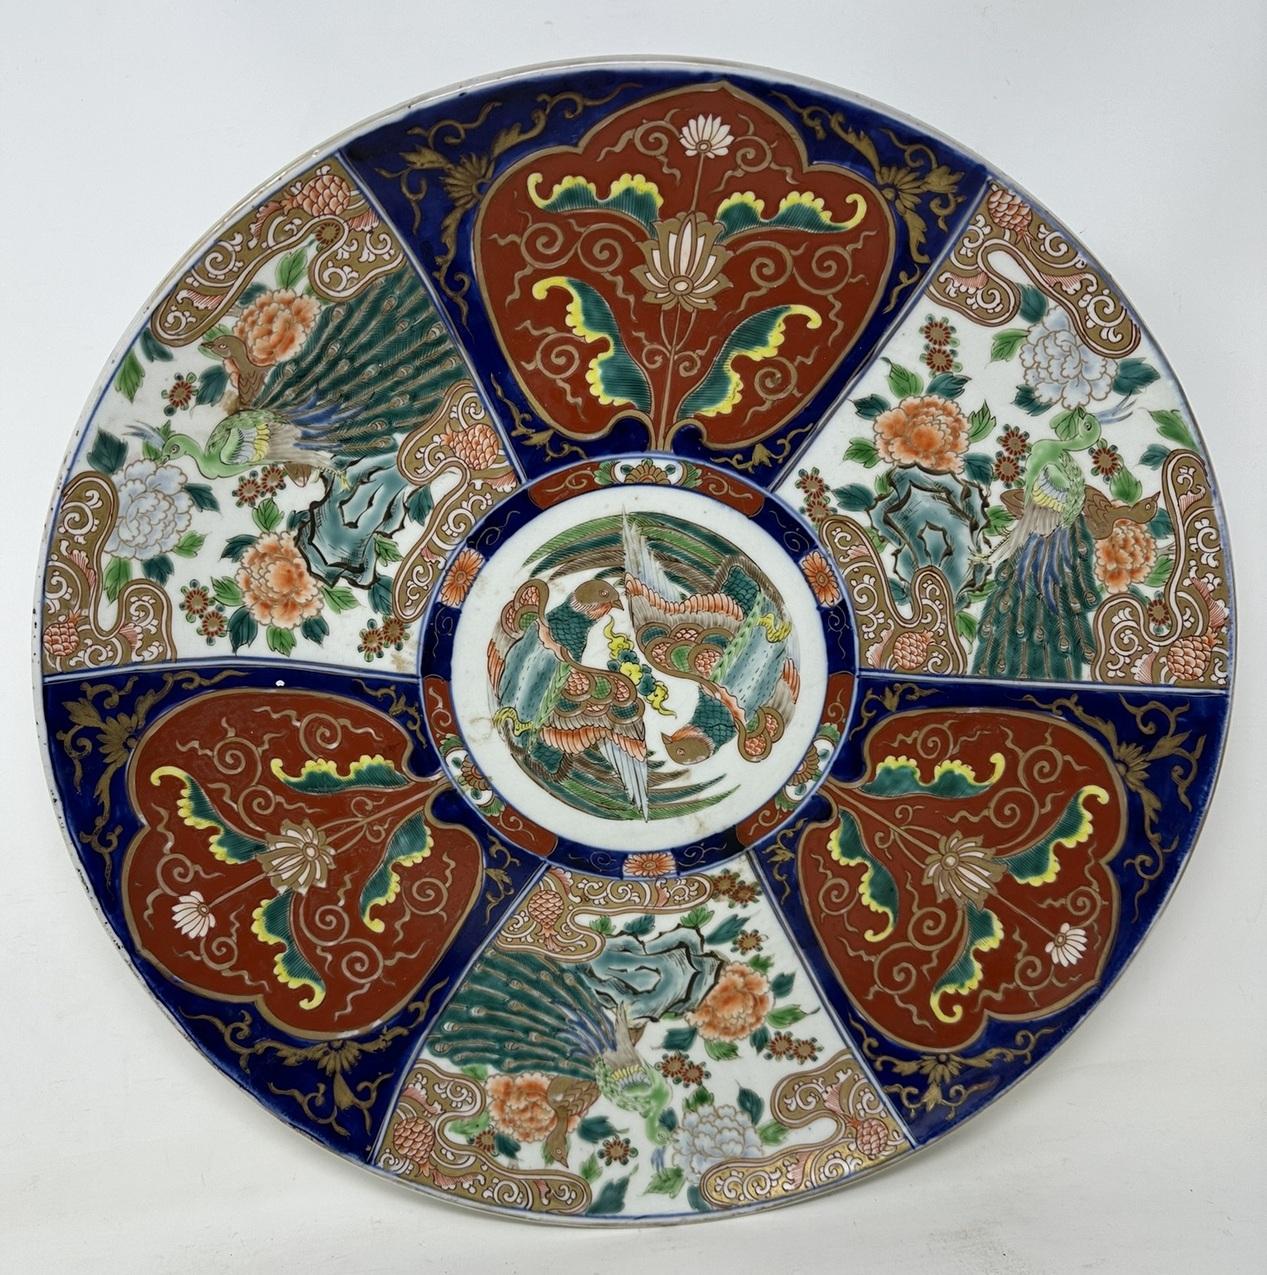 Stunning Large Japanese Circular Form Imari Deep Cabinet Bowl or Centerpiece of outstanding quality and generous proportions, made during the last half of the Nineteenth Century possibly from the Koransha Potteries. 

Extensively hand decorated with